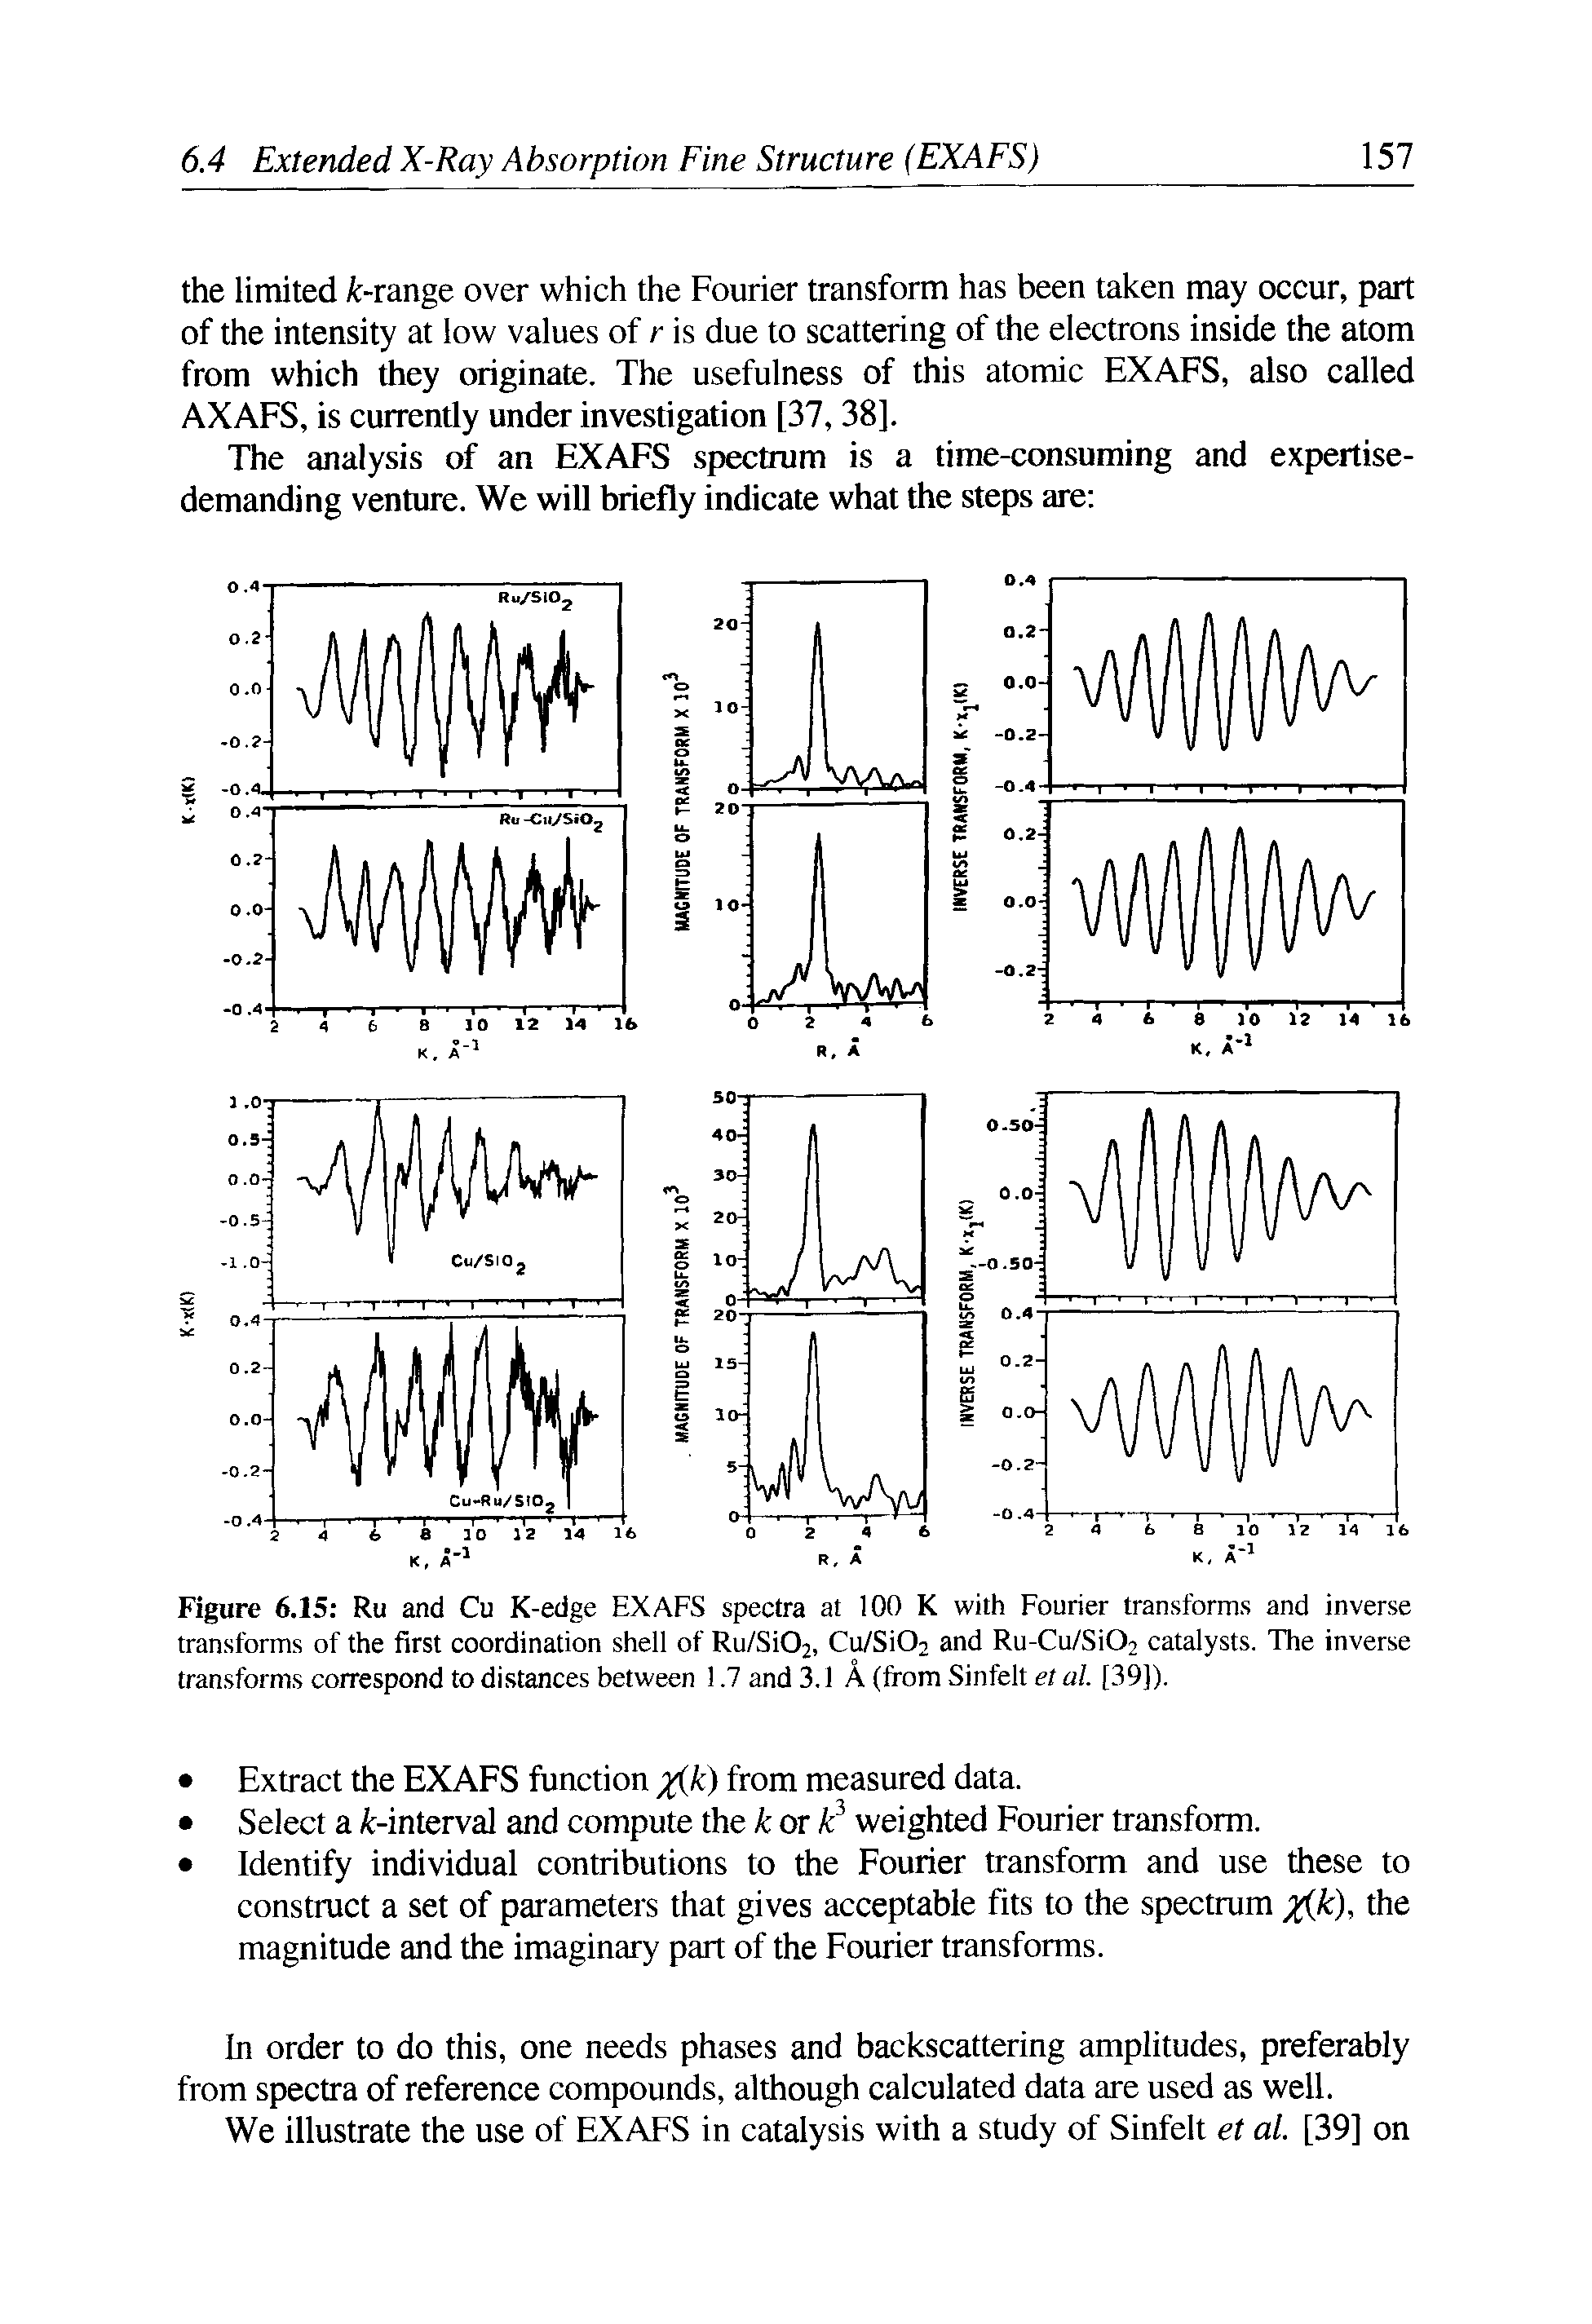 Figure 6.15 Ru and Cu K-edge EXAFS spectra at 100 K with Fourier transforms and inverse transforms of the first coordination shell of Ru/Si02, Cu/Si02 and Ru-Cu/Si02 catalysts. The inverse transforms correspond to distances between 1.7 and 3.1 A (from Sinfelt et al. [39]).